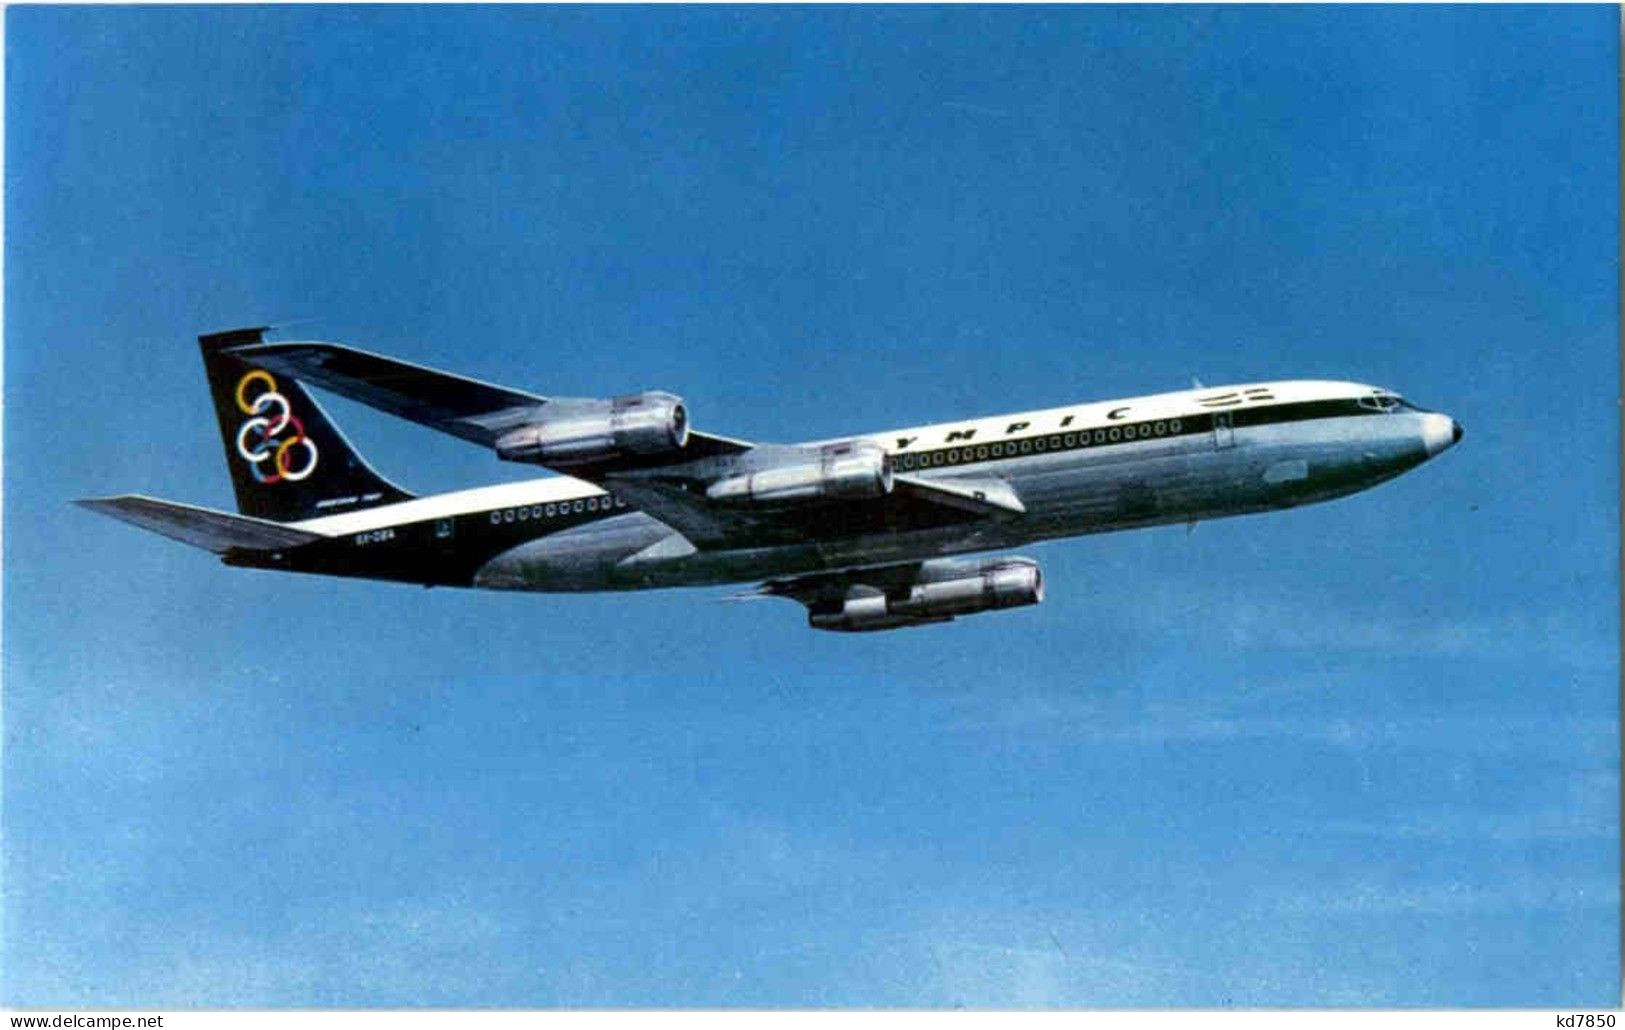 Olympic - Boeing 707 - 1946-....: Moderne